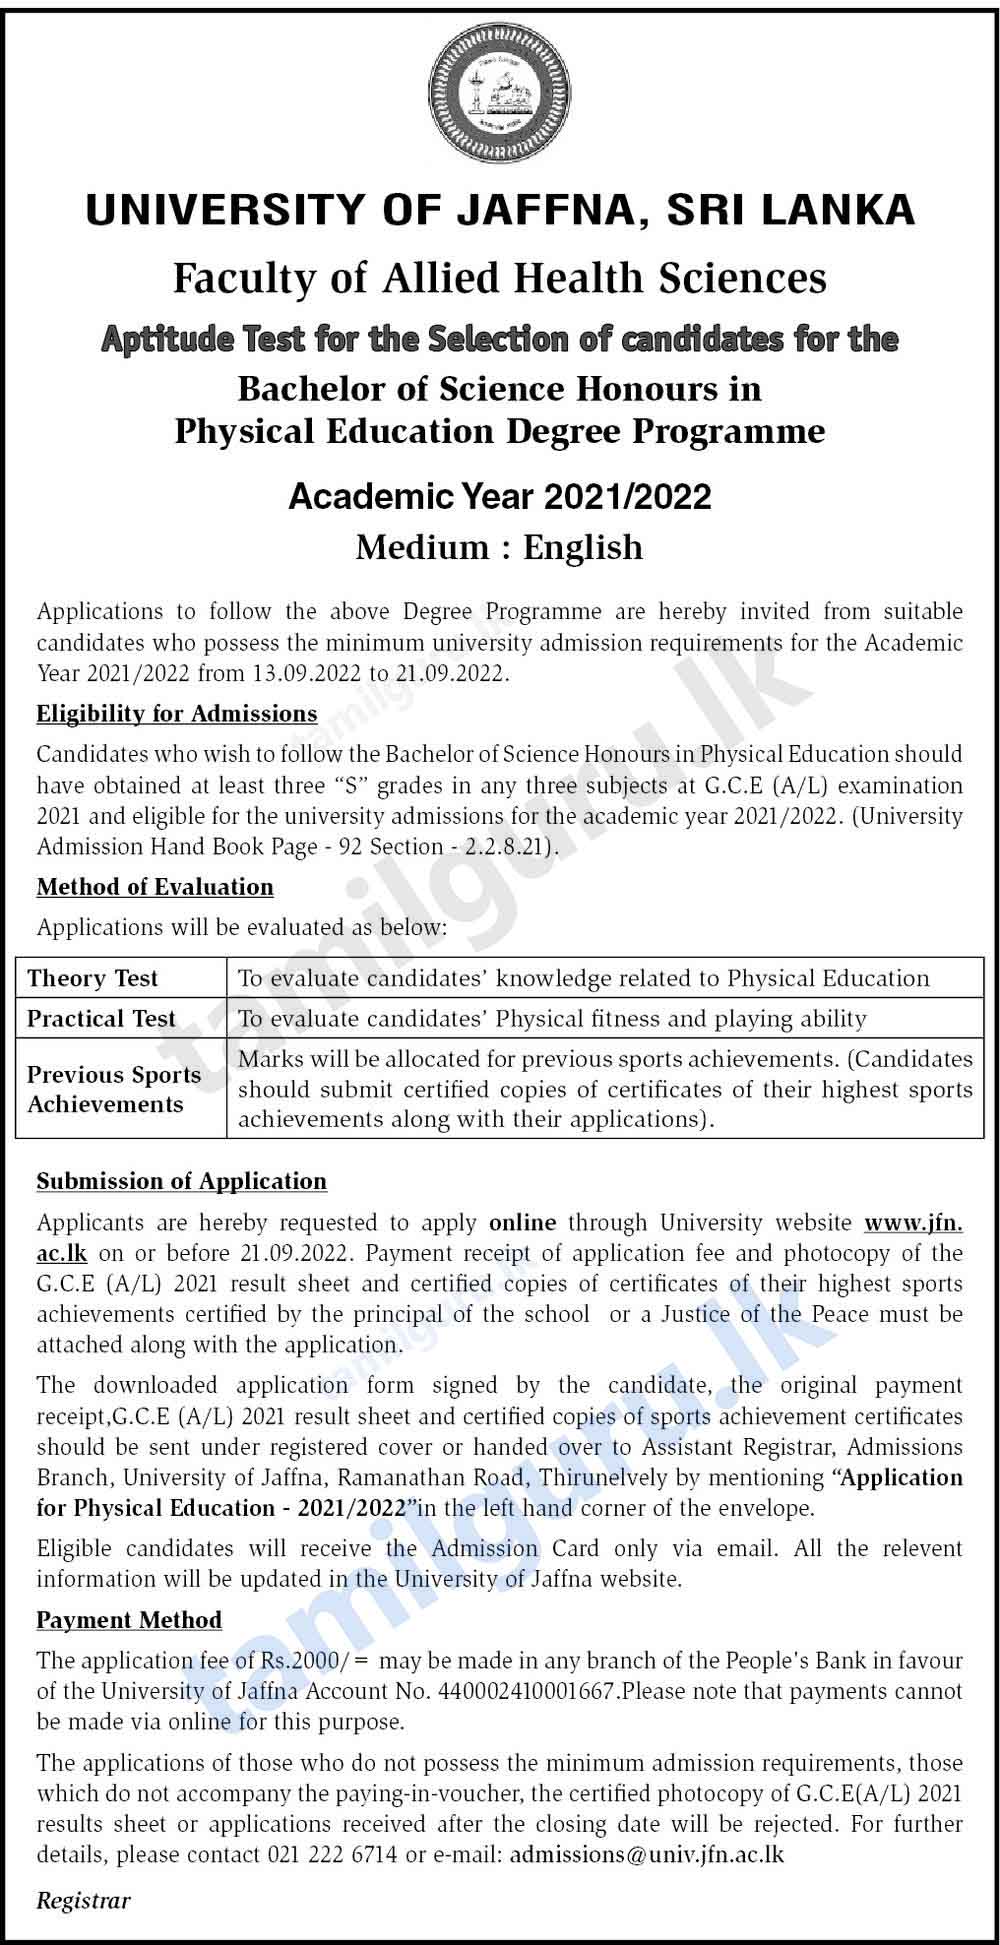 University of Jaffna BSc in Physical Education Degree Aptitude Test Application 2022